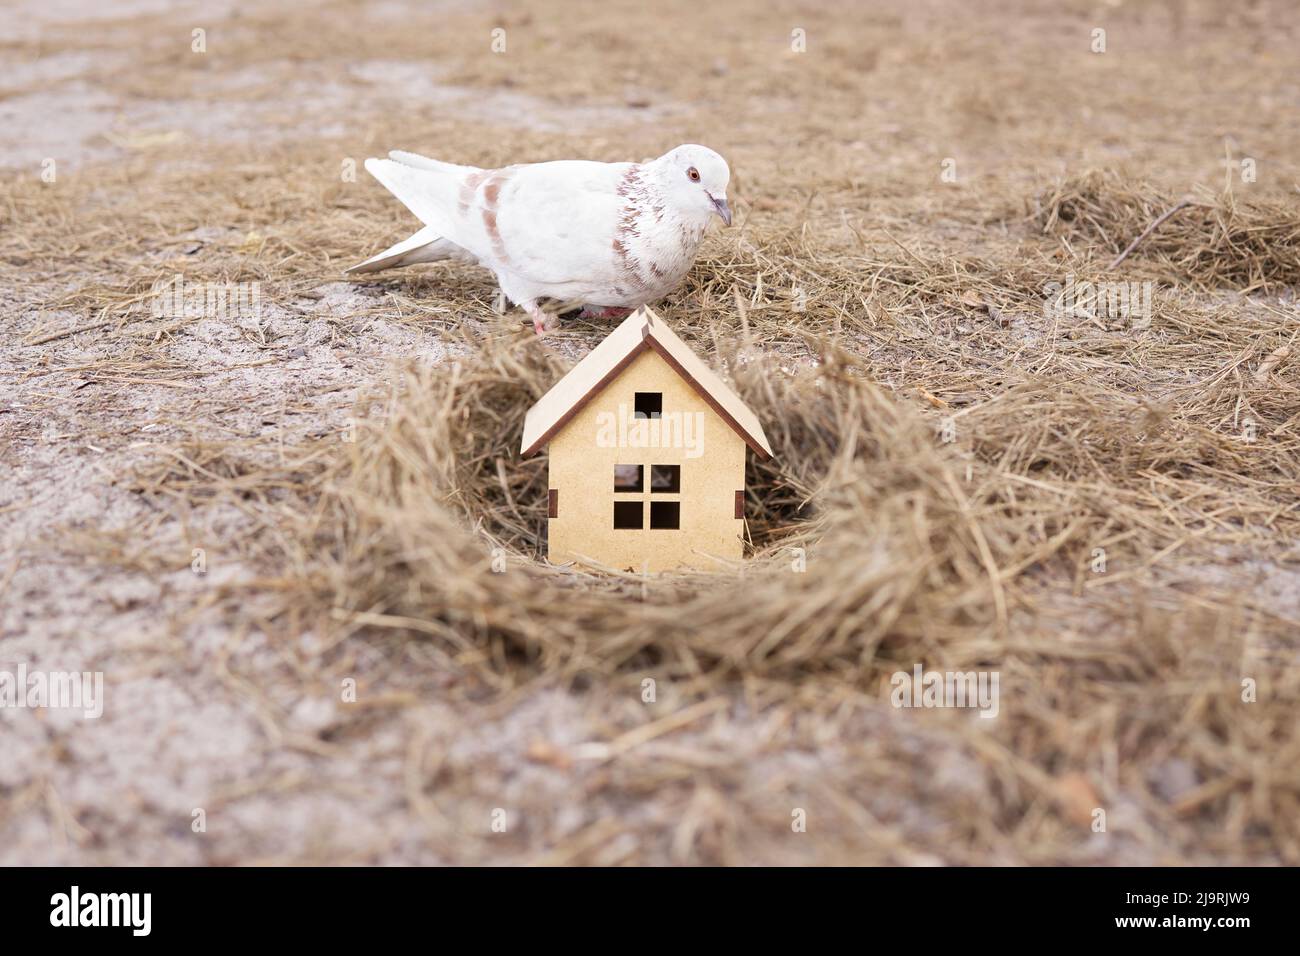 White dove inspecting a miniature wooden house standing in the nest, selective focus. Finding a perfect family home. Stock Photo